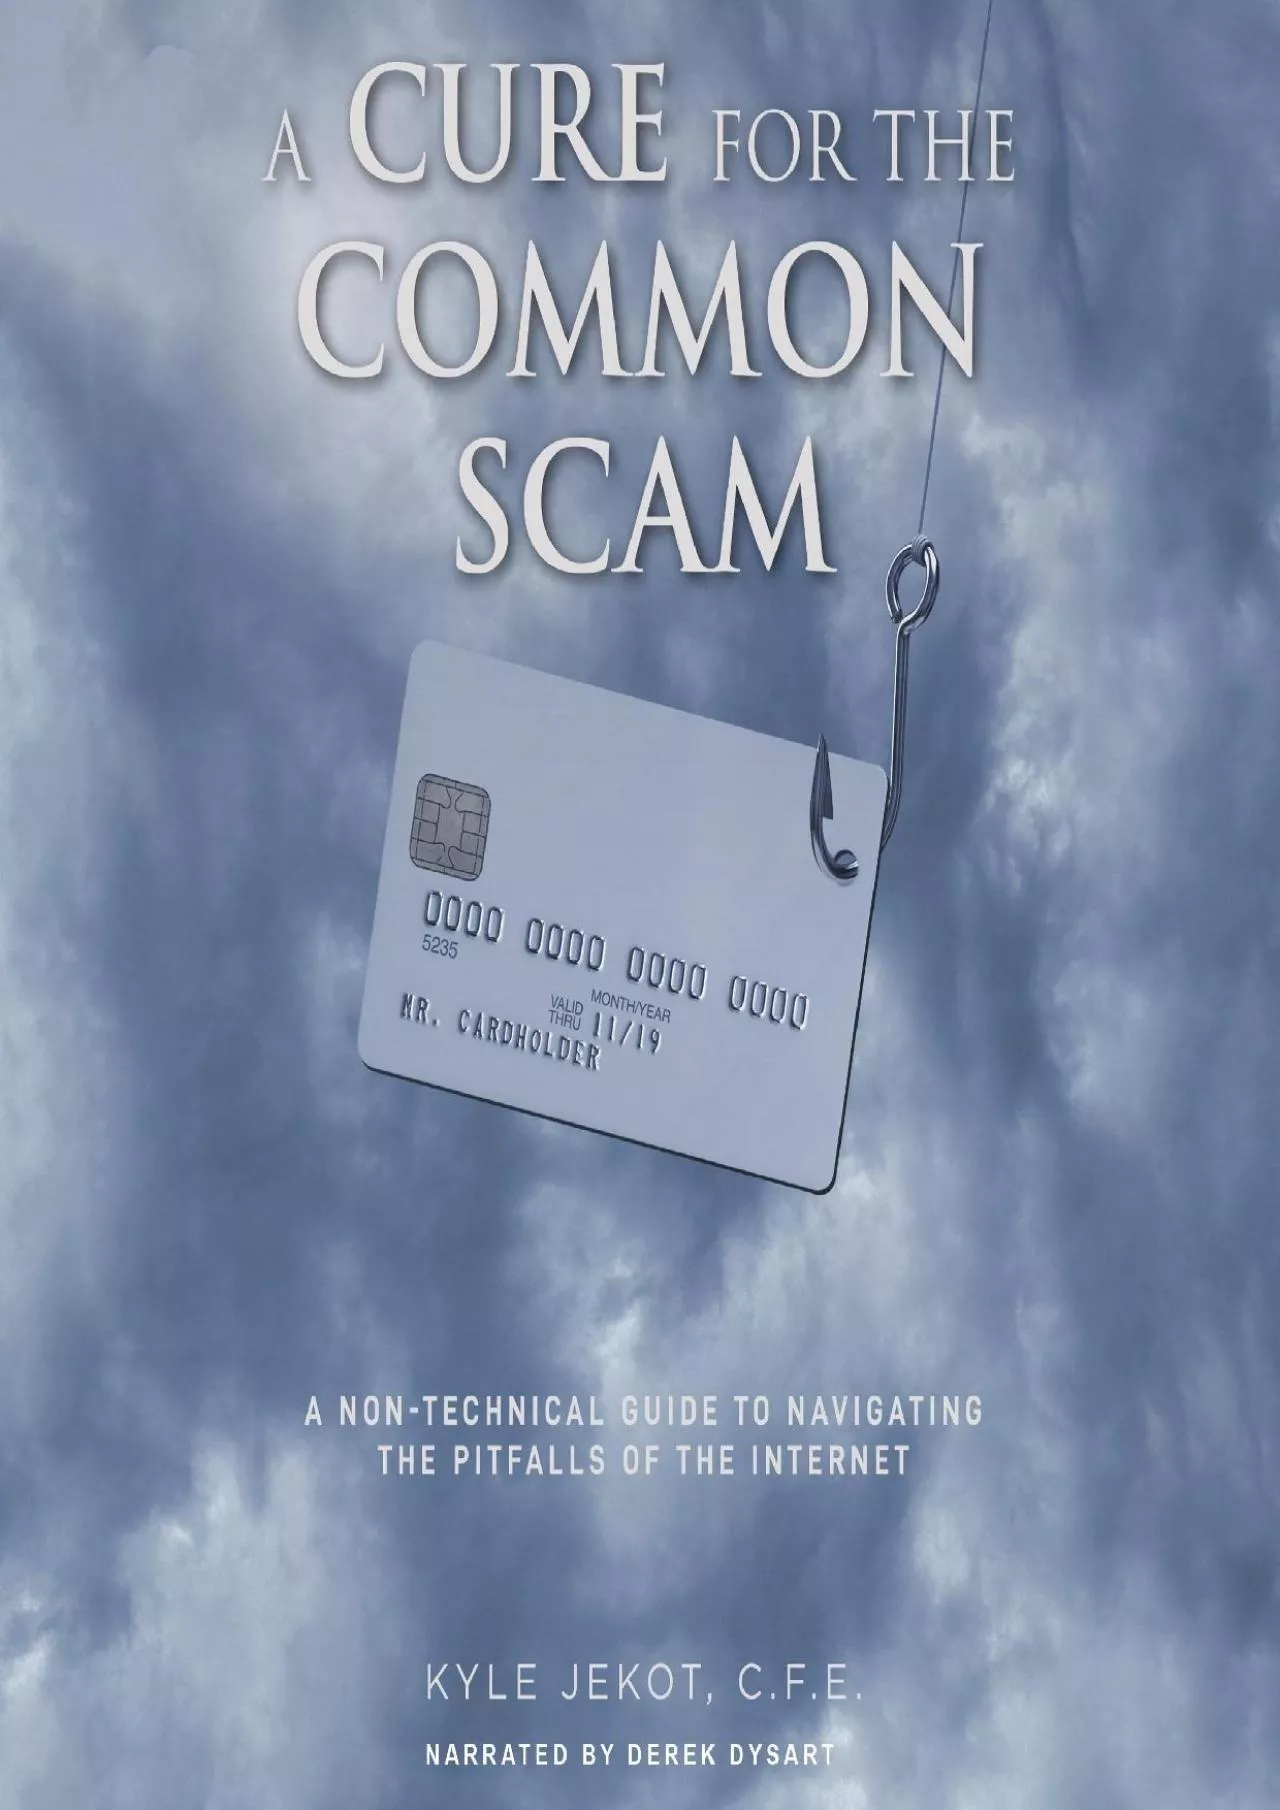 [READING BOOK]-A Cure for the Common Scam: A Non-Technical Guide for Navigating the Pitfalls